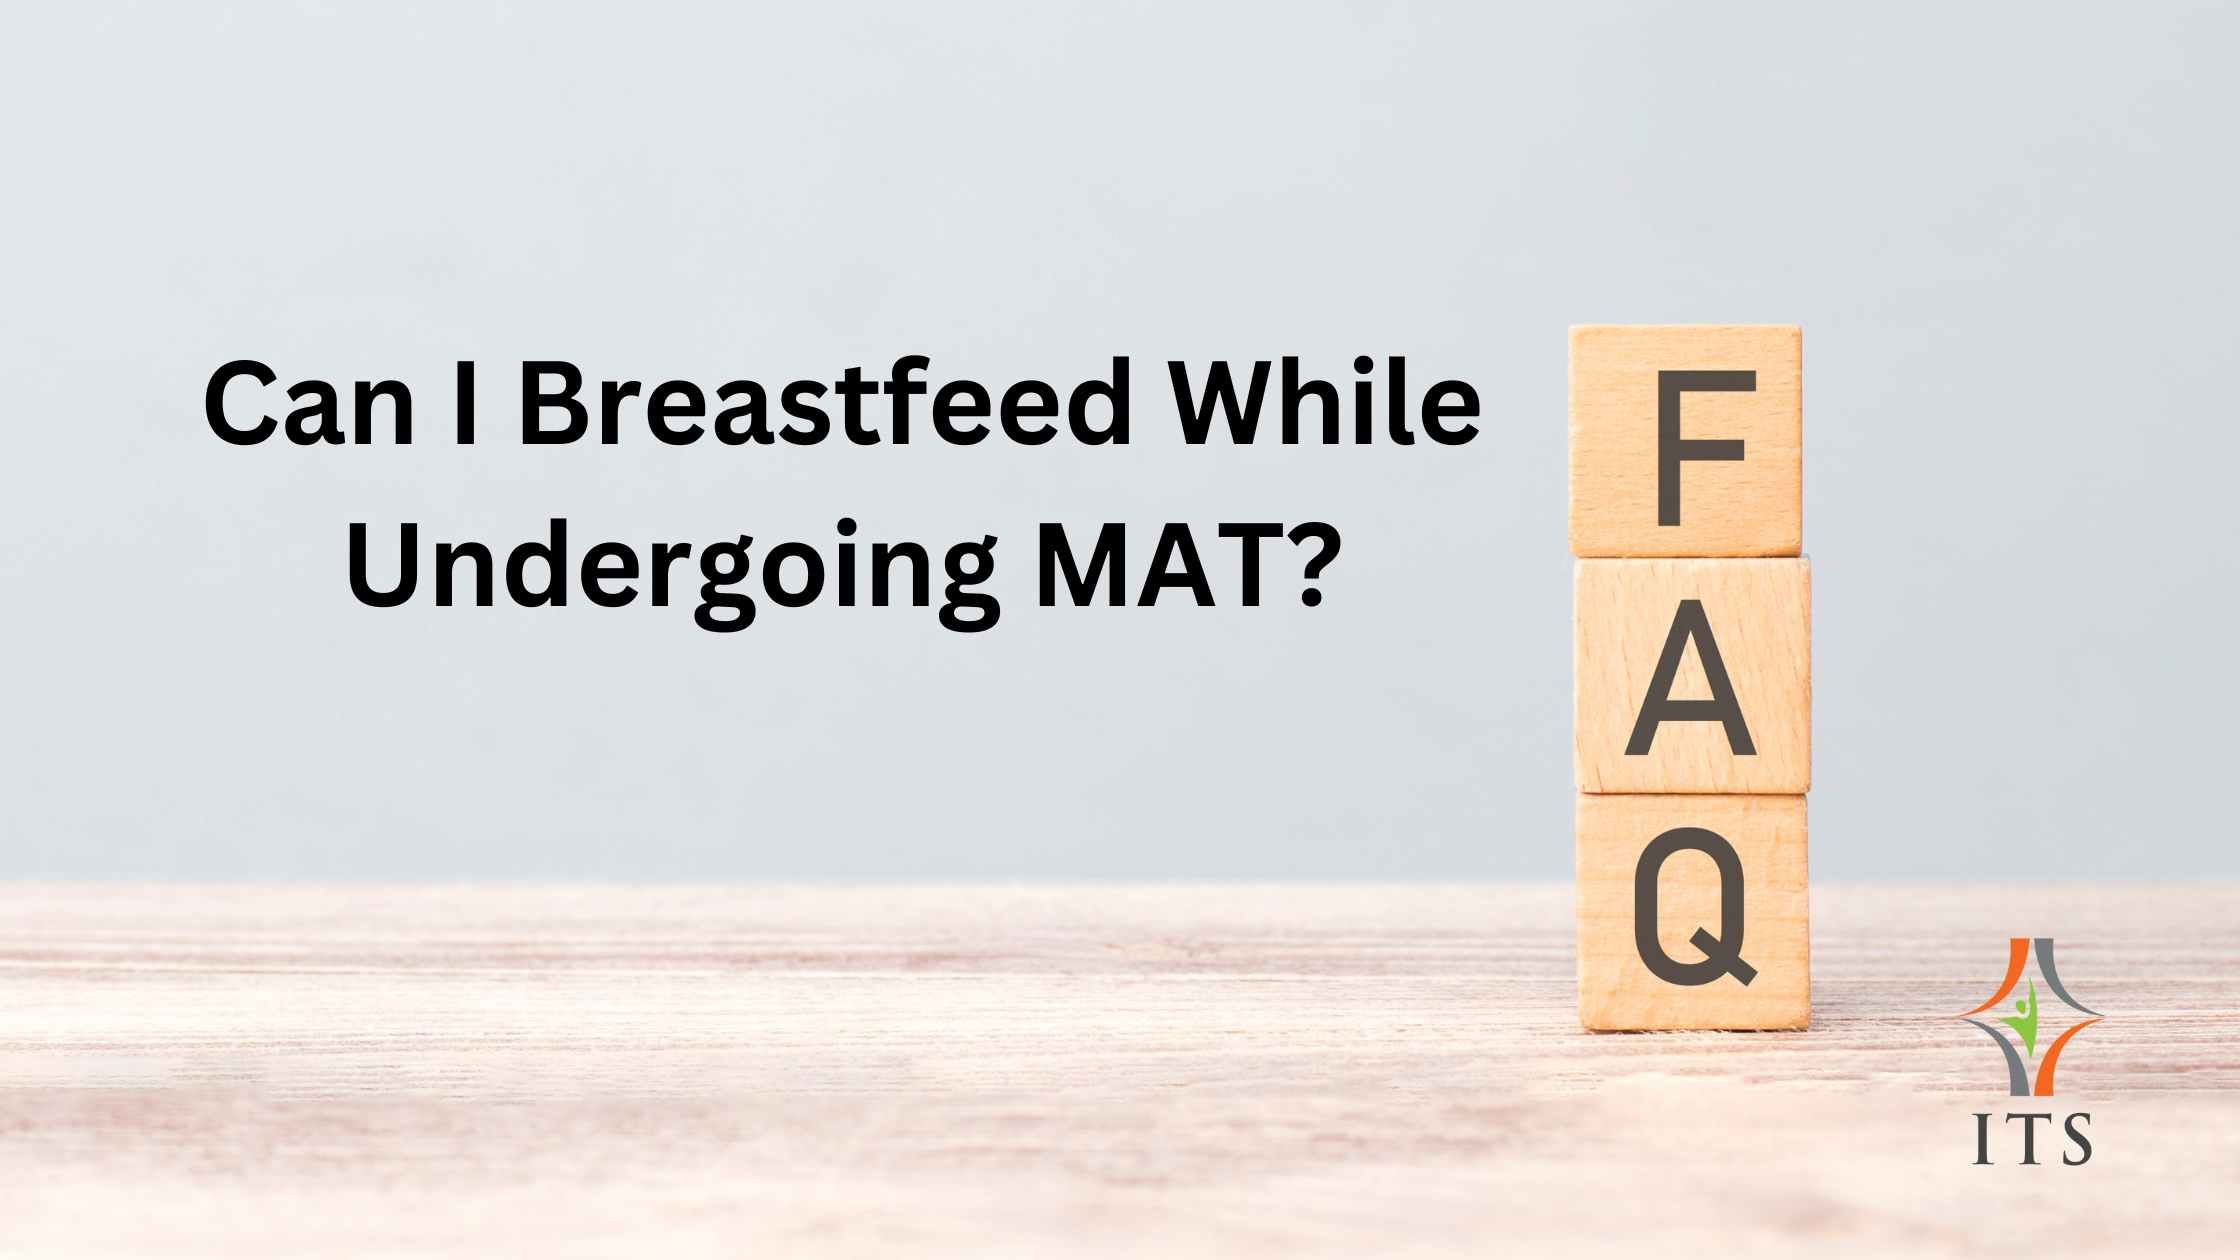 Can I Breastfeed while undergoing MAT?